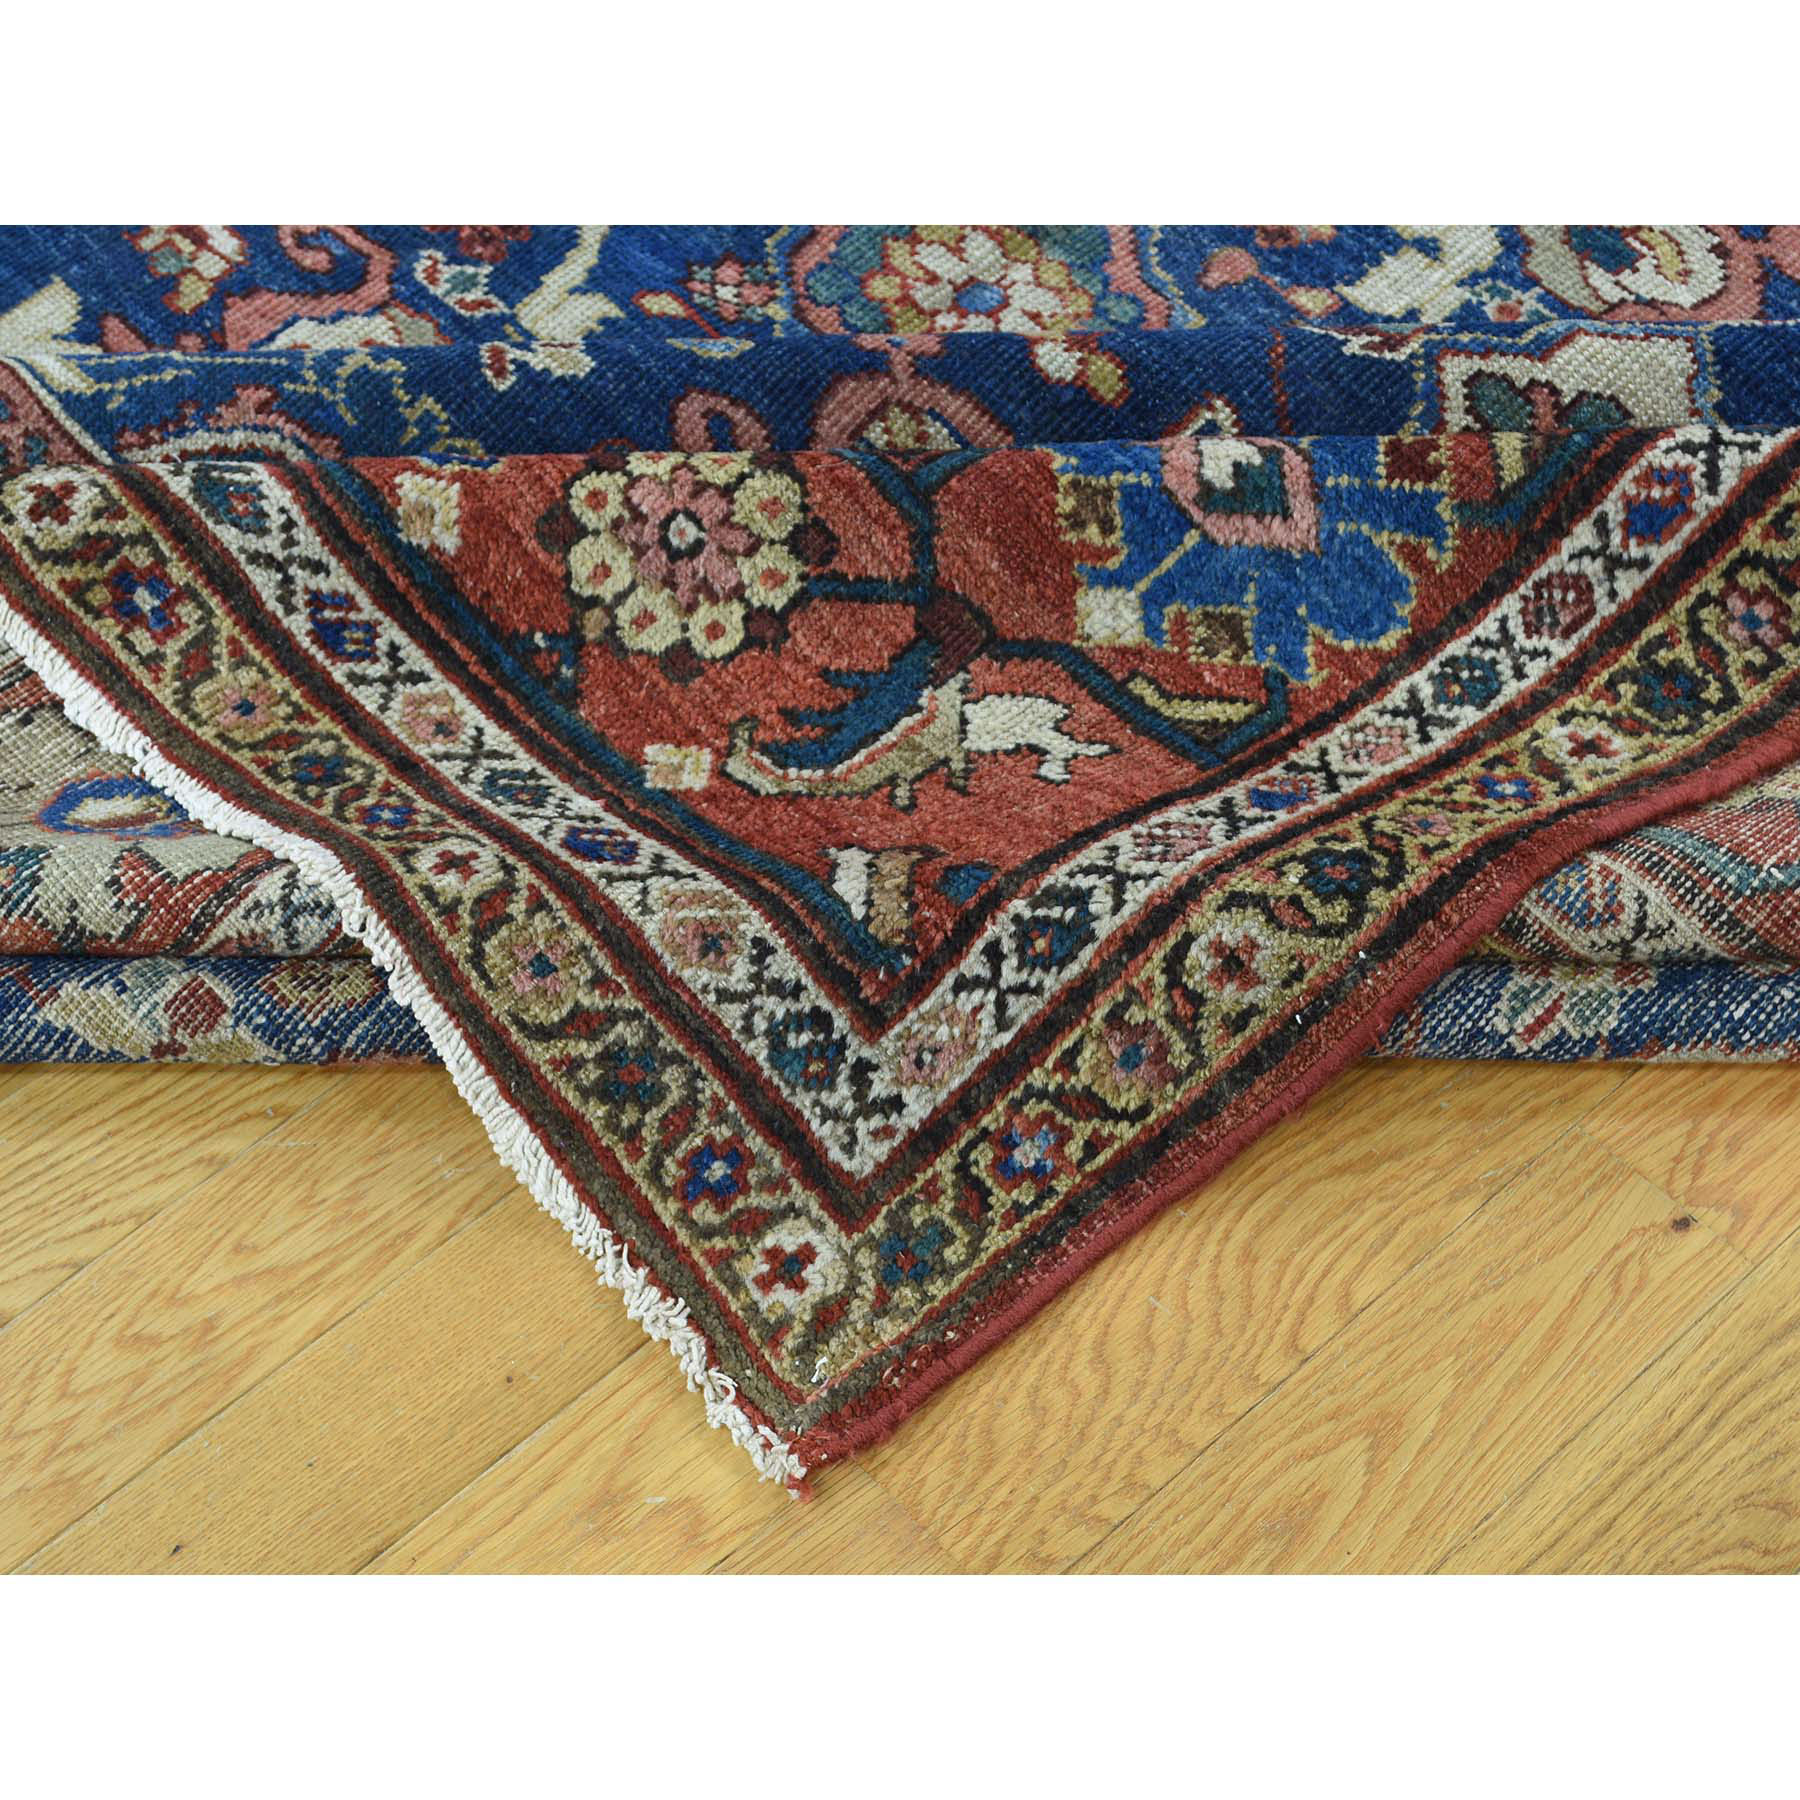 8-10 x11-10  Hand-Knotted Antique Persian Mahal Even Wear Exc Cond Rug 